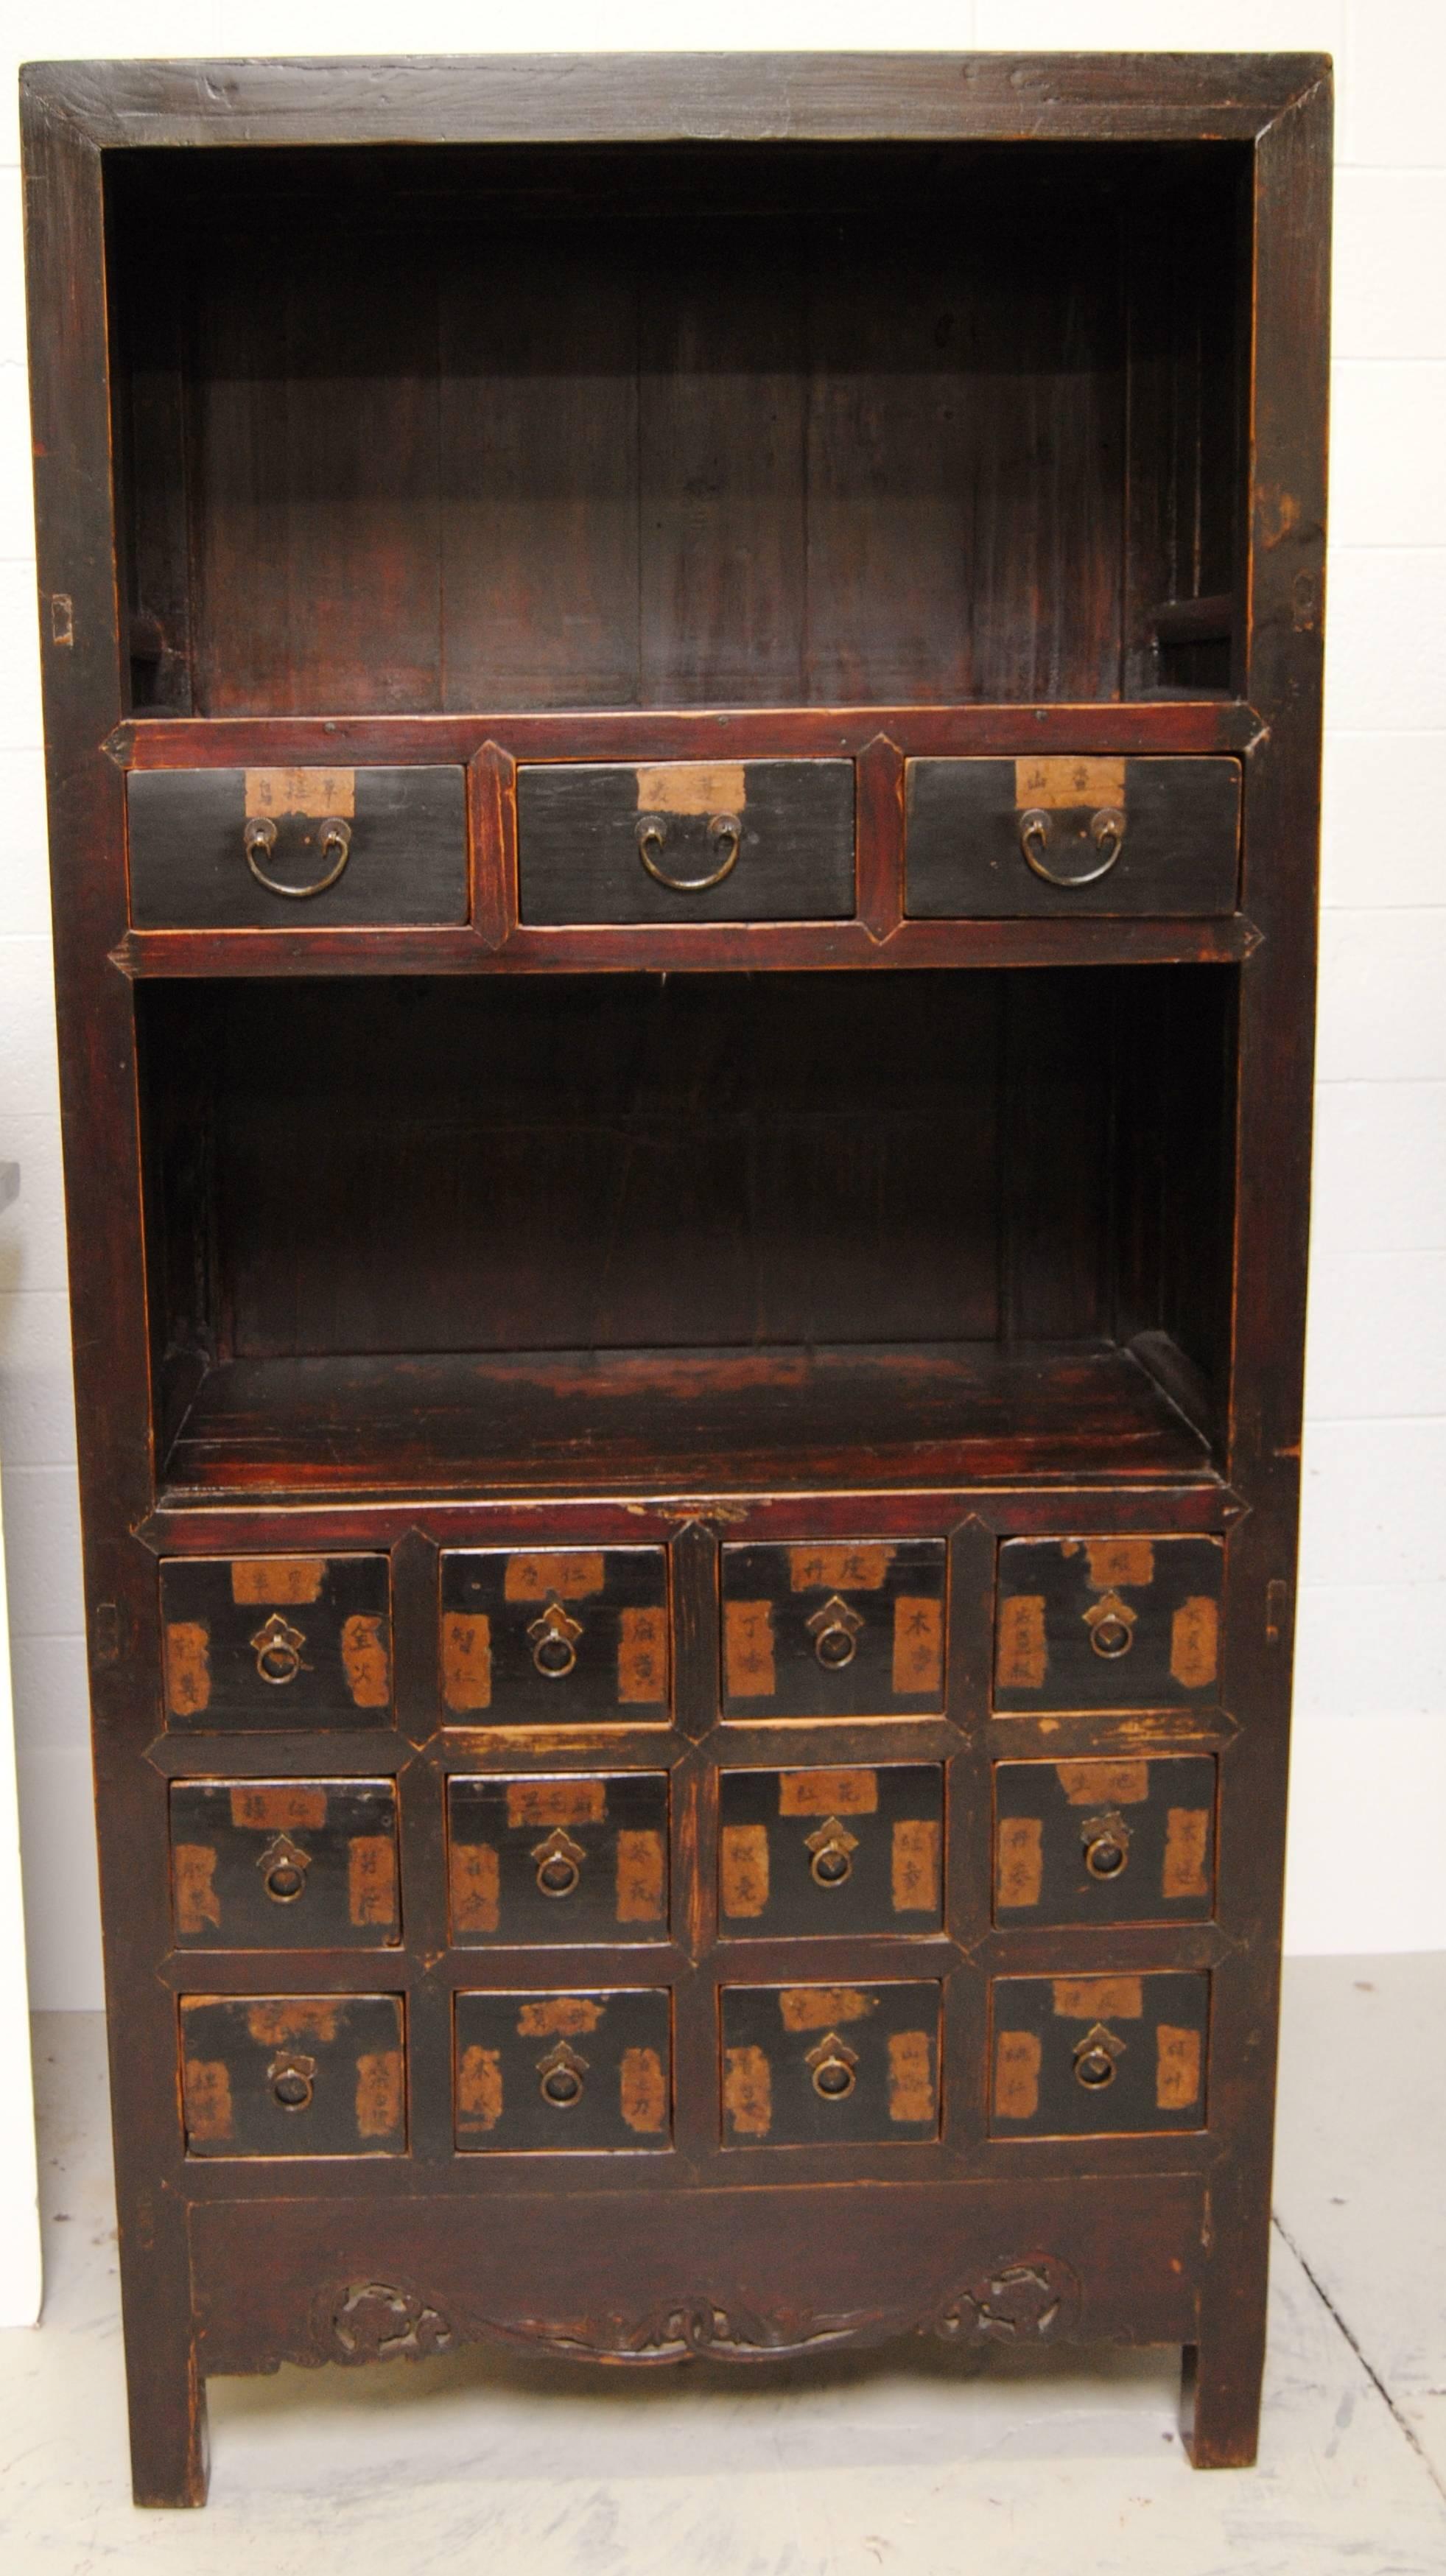 Wood Antique Chinese 15-Drawer Apothecary with Shelves, Late 19th Century For Sale